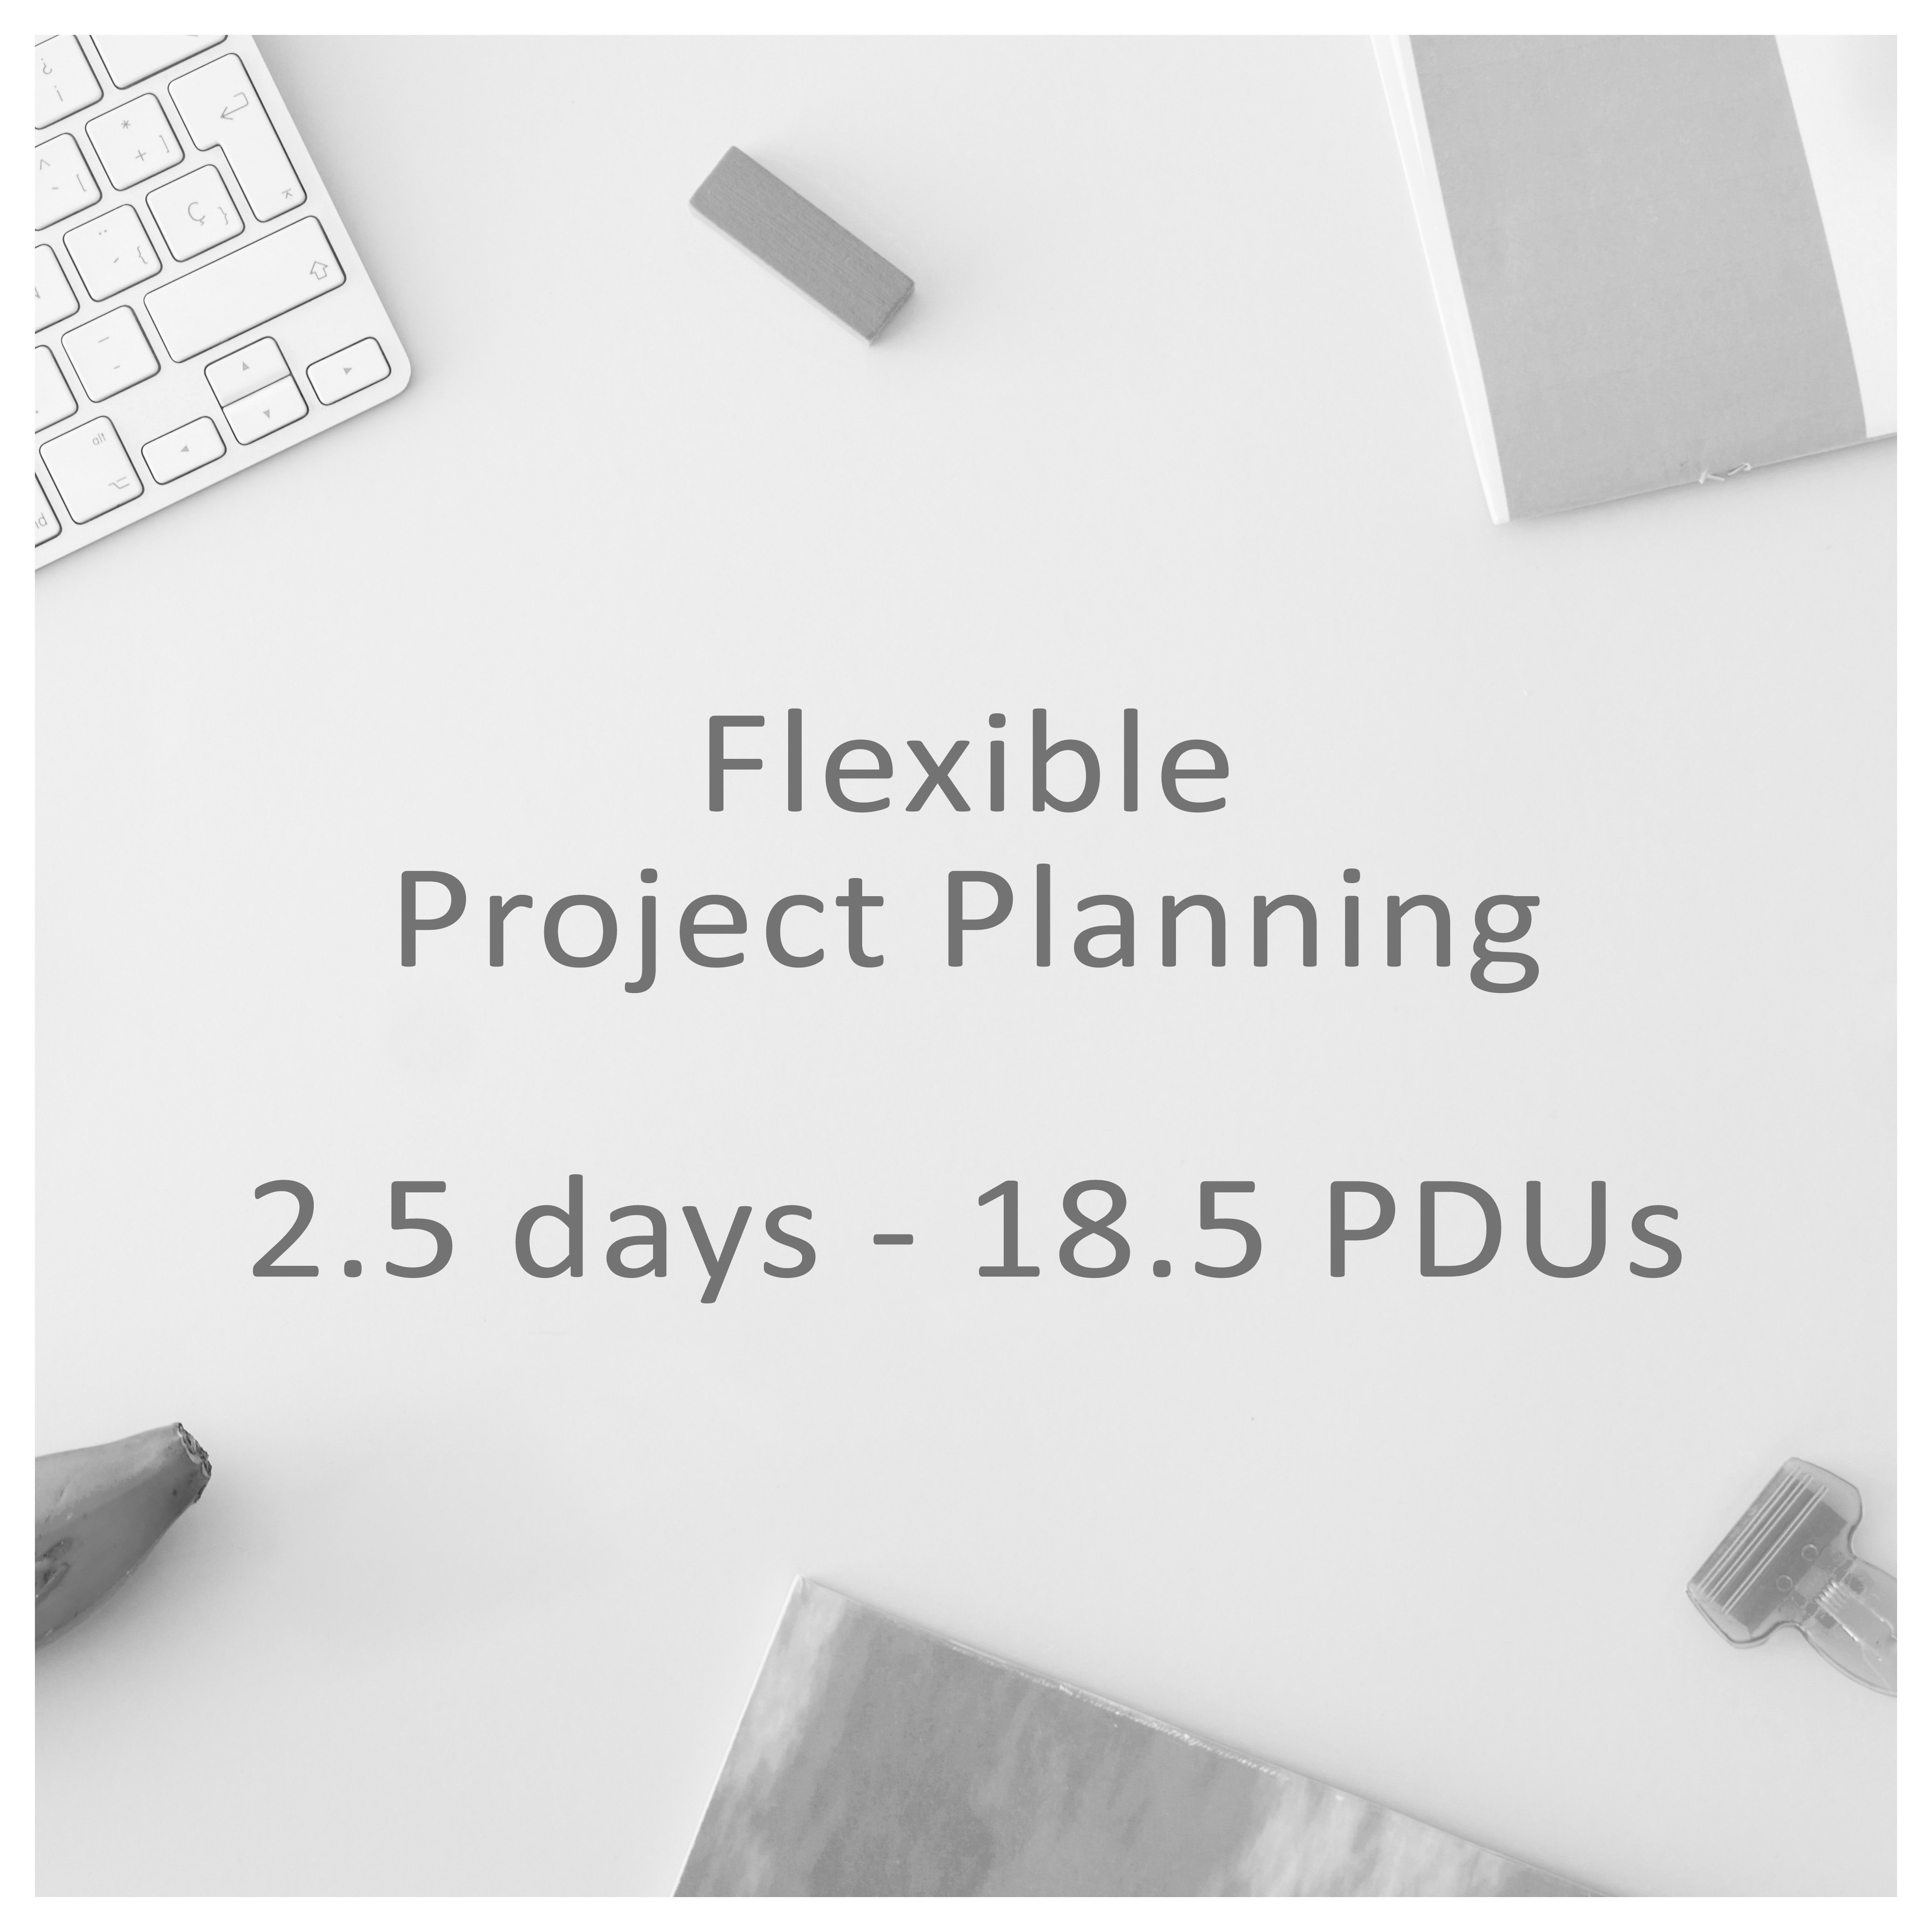 Flexible Project Planning